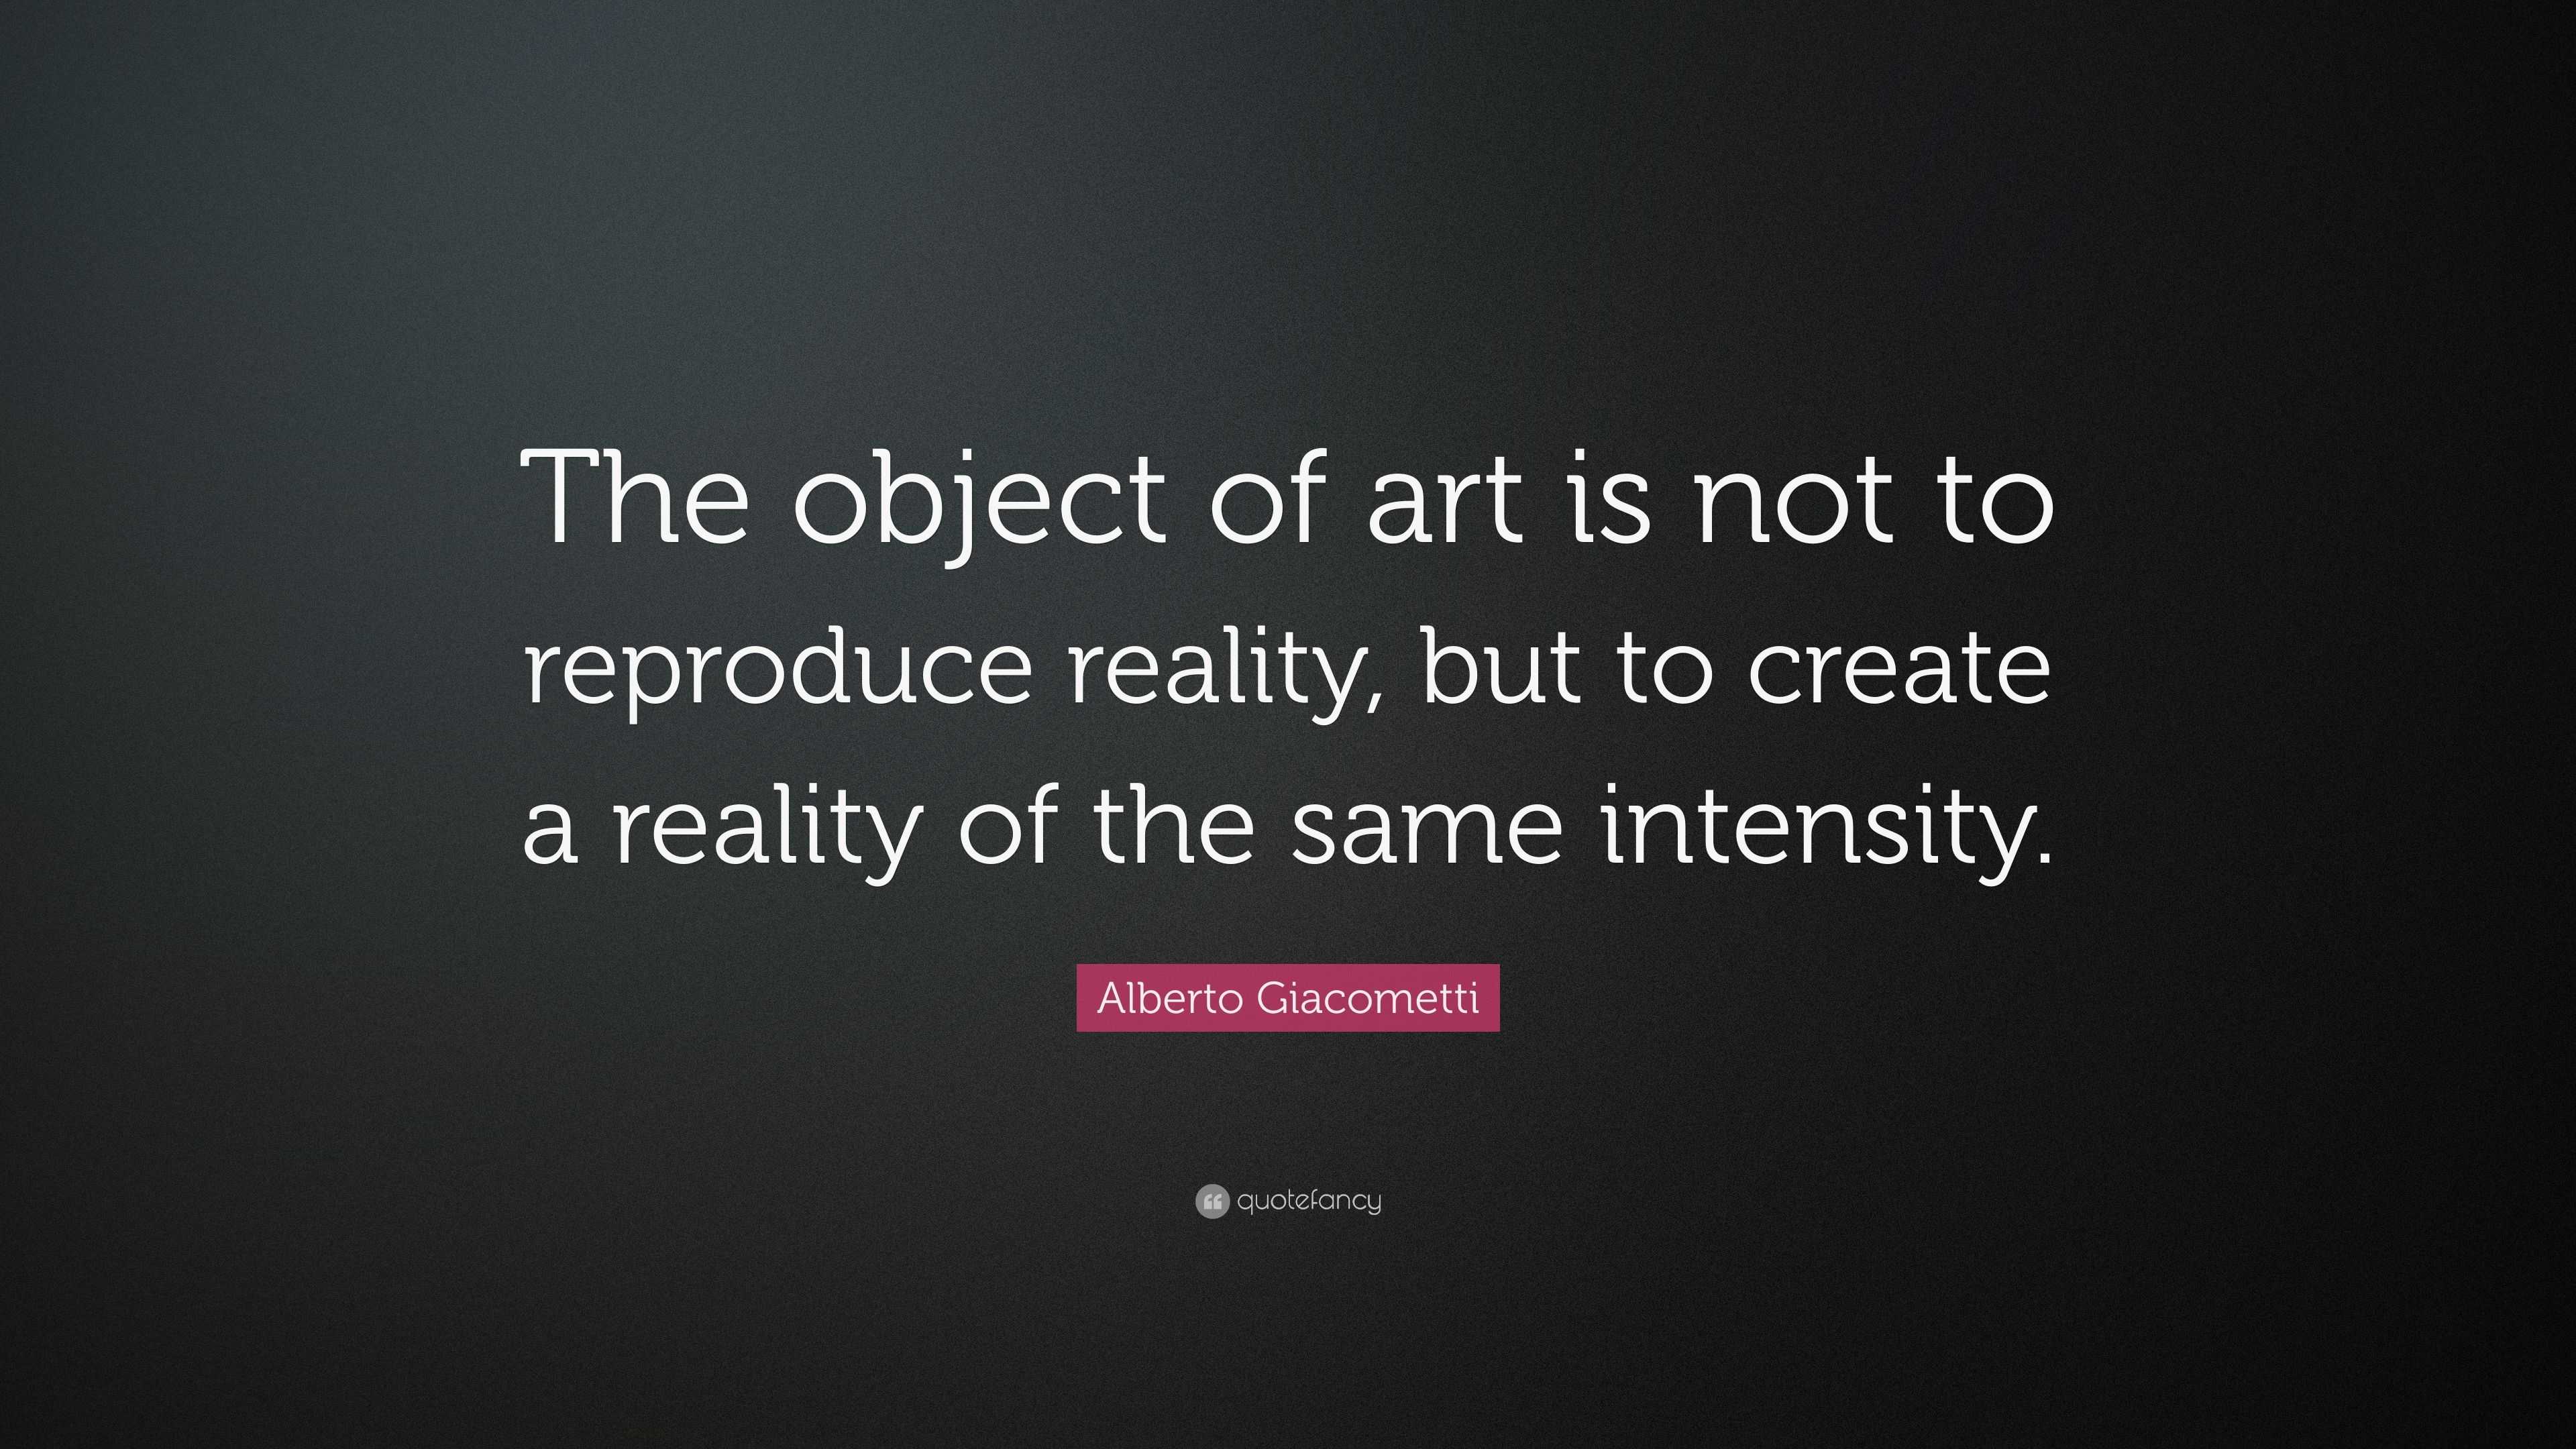 Alberto Giacometti Quote: “The object of art is not to reproduce ...